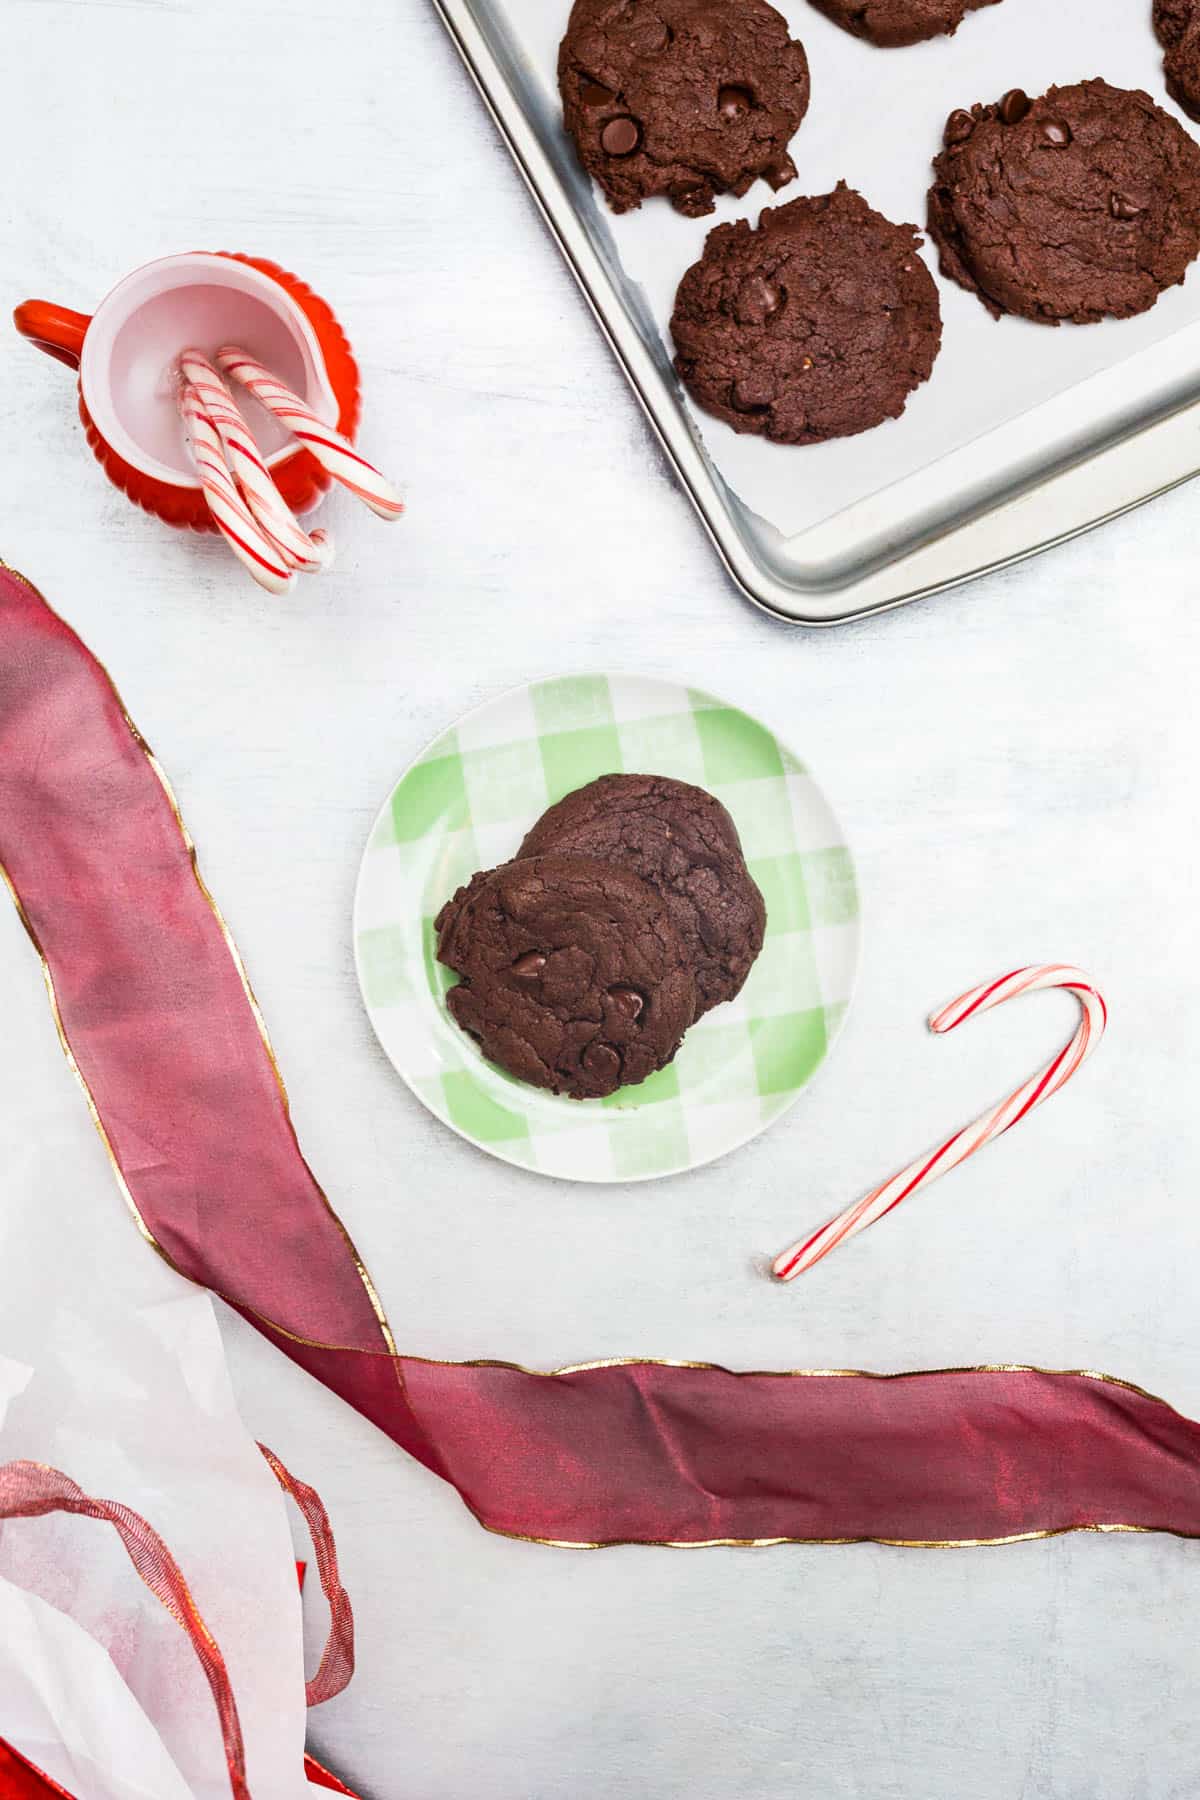 Chocolate cookies on green plate surrounded by red ribbons, gift bags, and candy canes on silver background